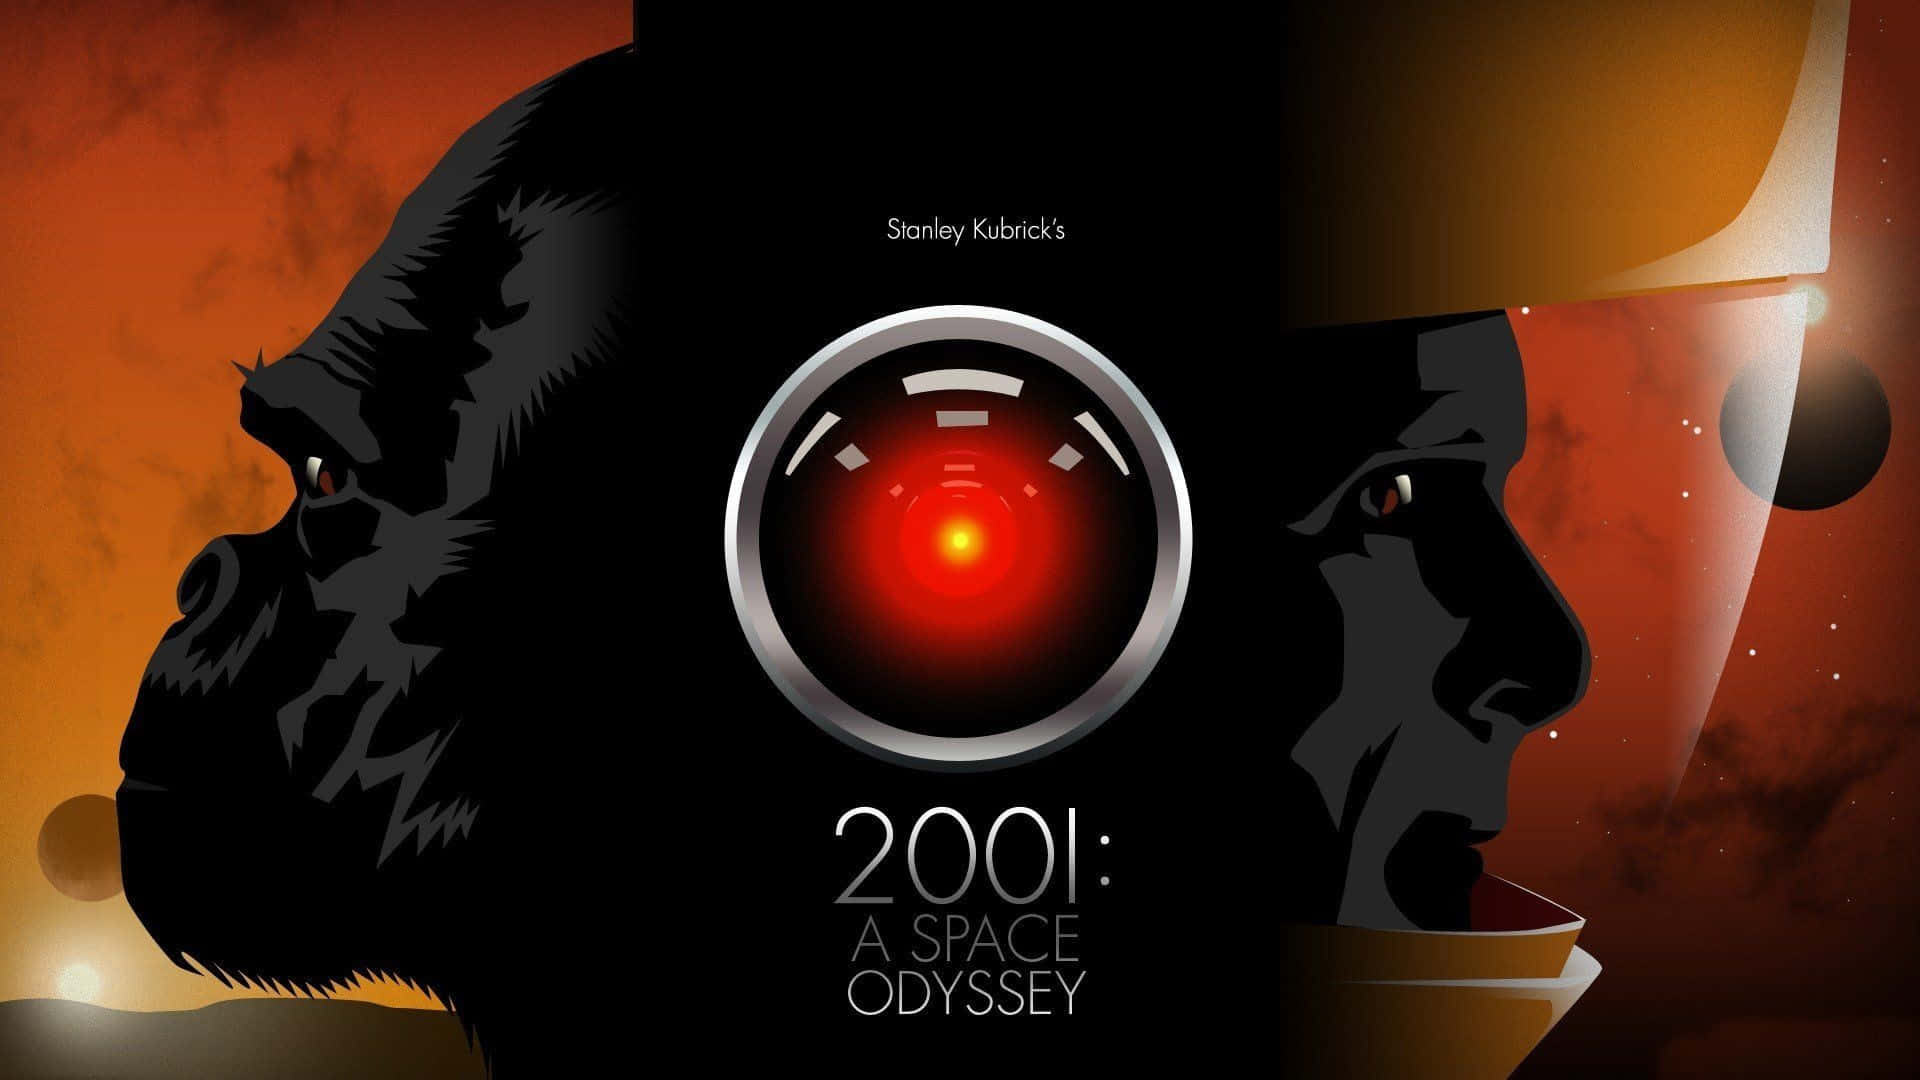 [100+] 2001 A Space Odyssey Wallpapers | Wallpapers.com